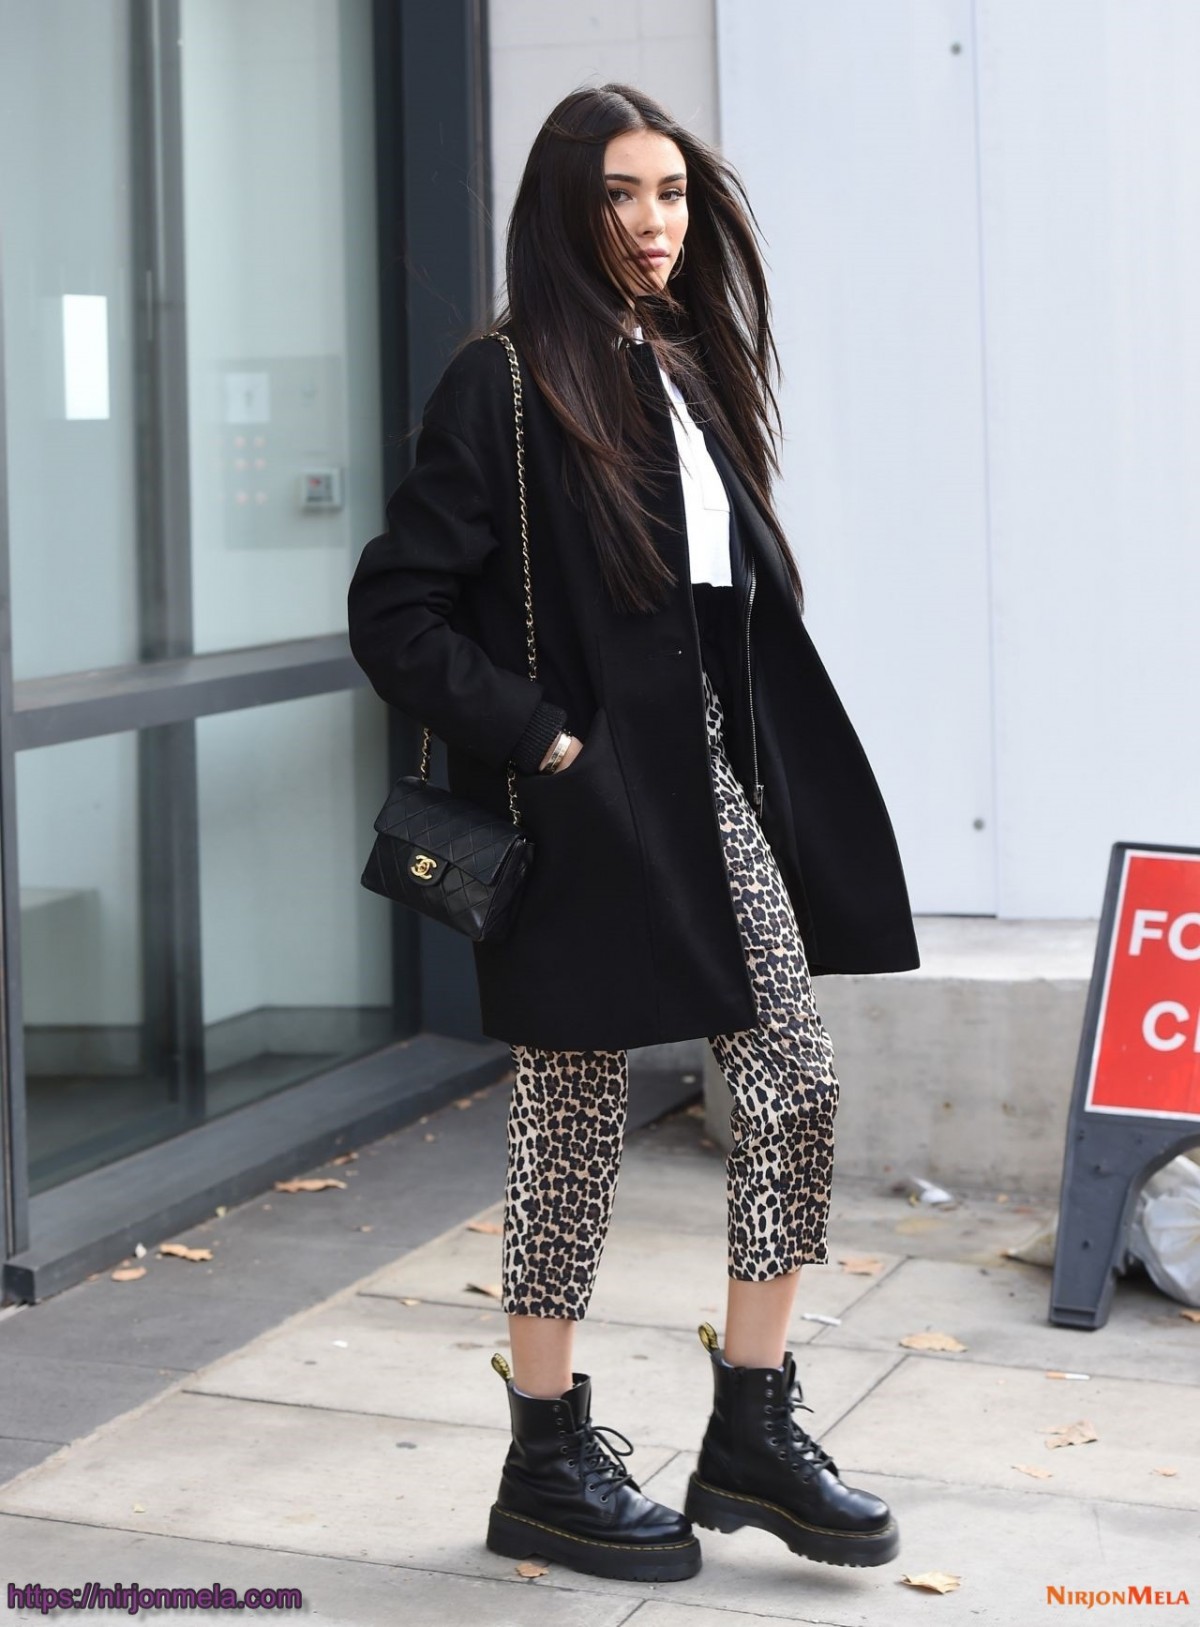 madison-beer-leaving-the-vevo-offices-in-london-10-23-2018-0.jpg